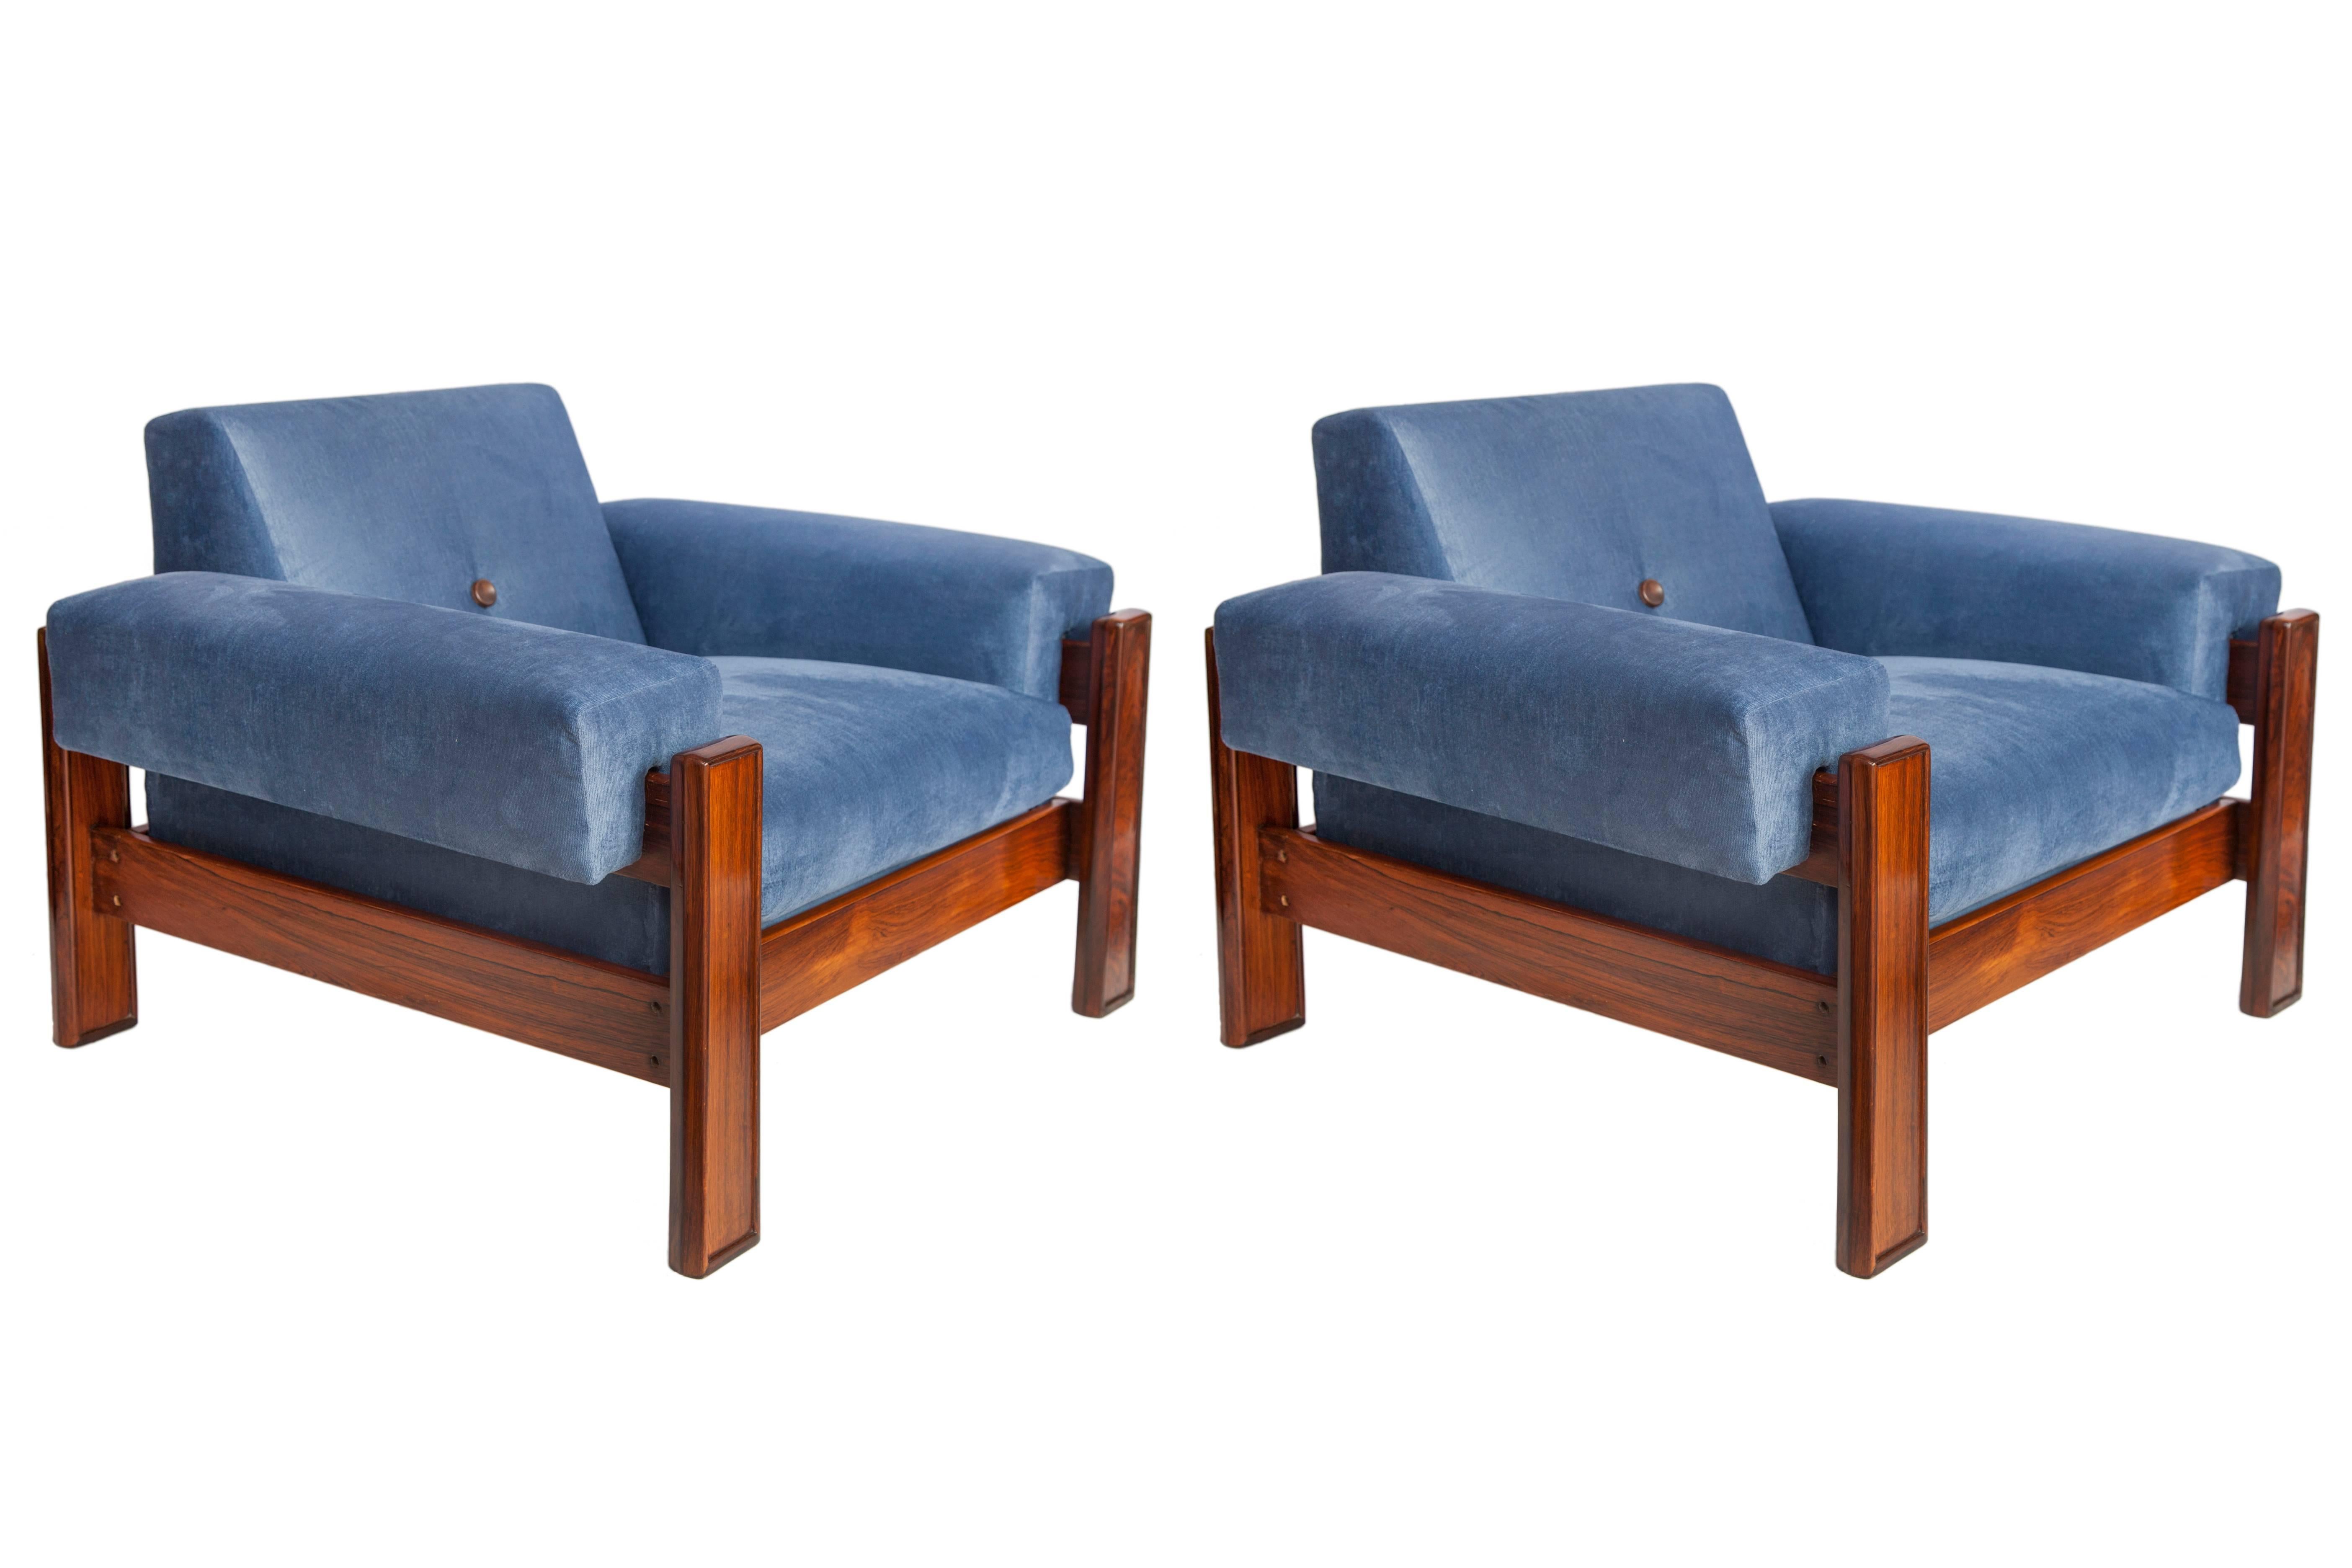 Mid-Century Modern armchairs in Brazilian jacaranda and blue upholstery from circa 1960. These chairs have been recently reupholstered in mixed polyester and viscose velvet. Each is in good vintage condition and has wear consistent with age and use.